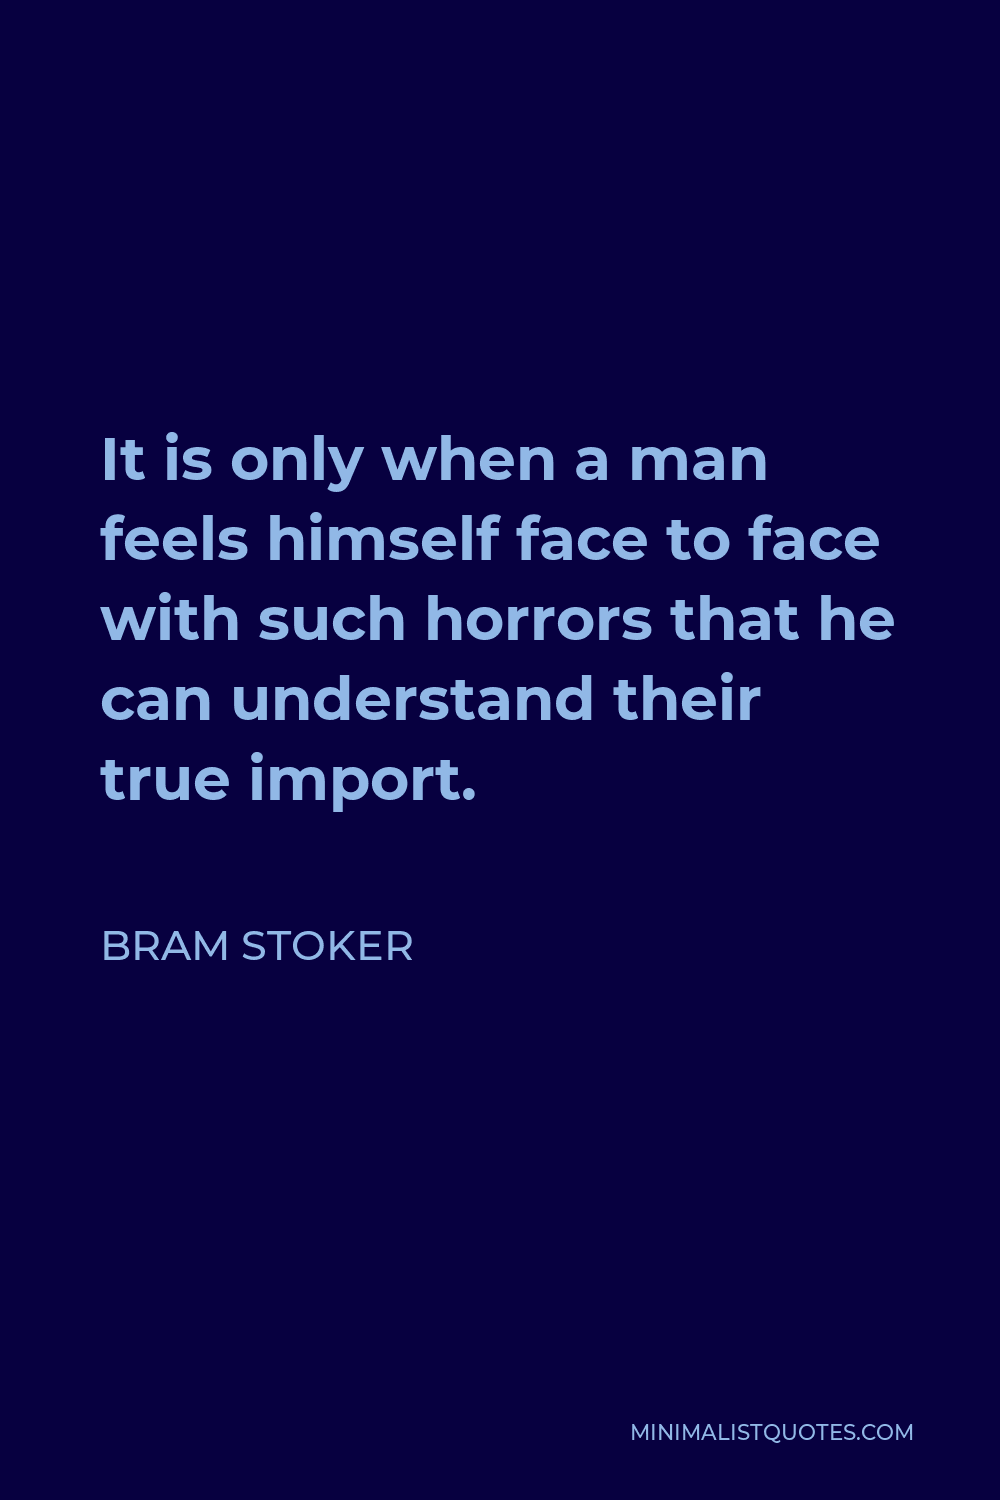 Bram Stoker Quote - It is only when a man feels himself face to face with such horrors that he can understand their true import.